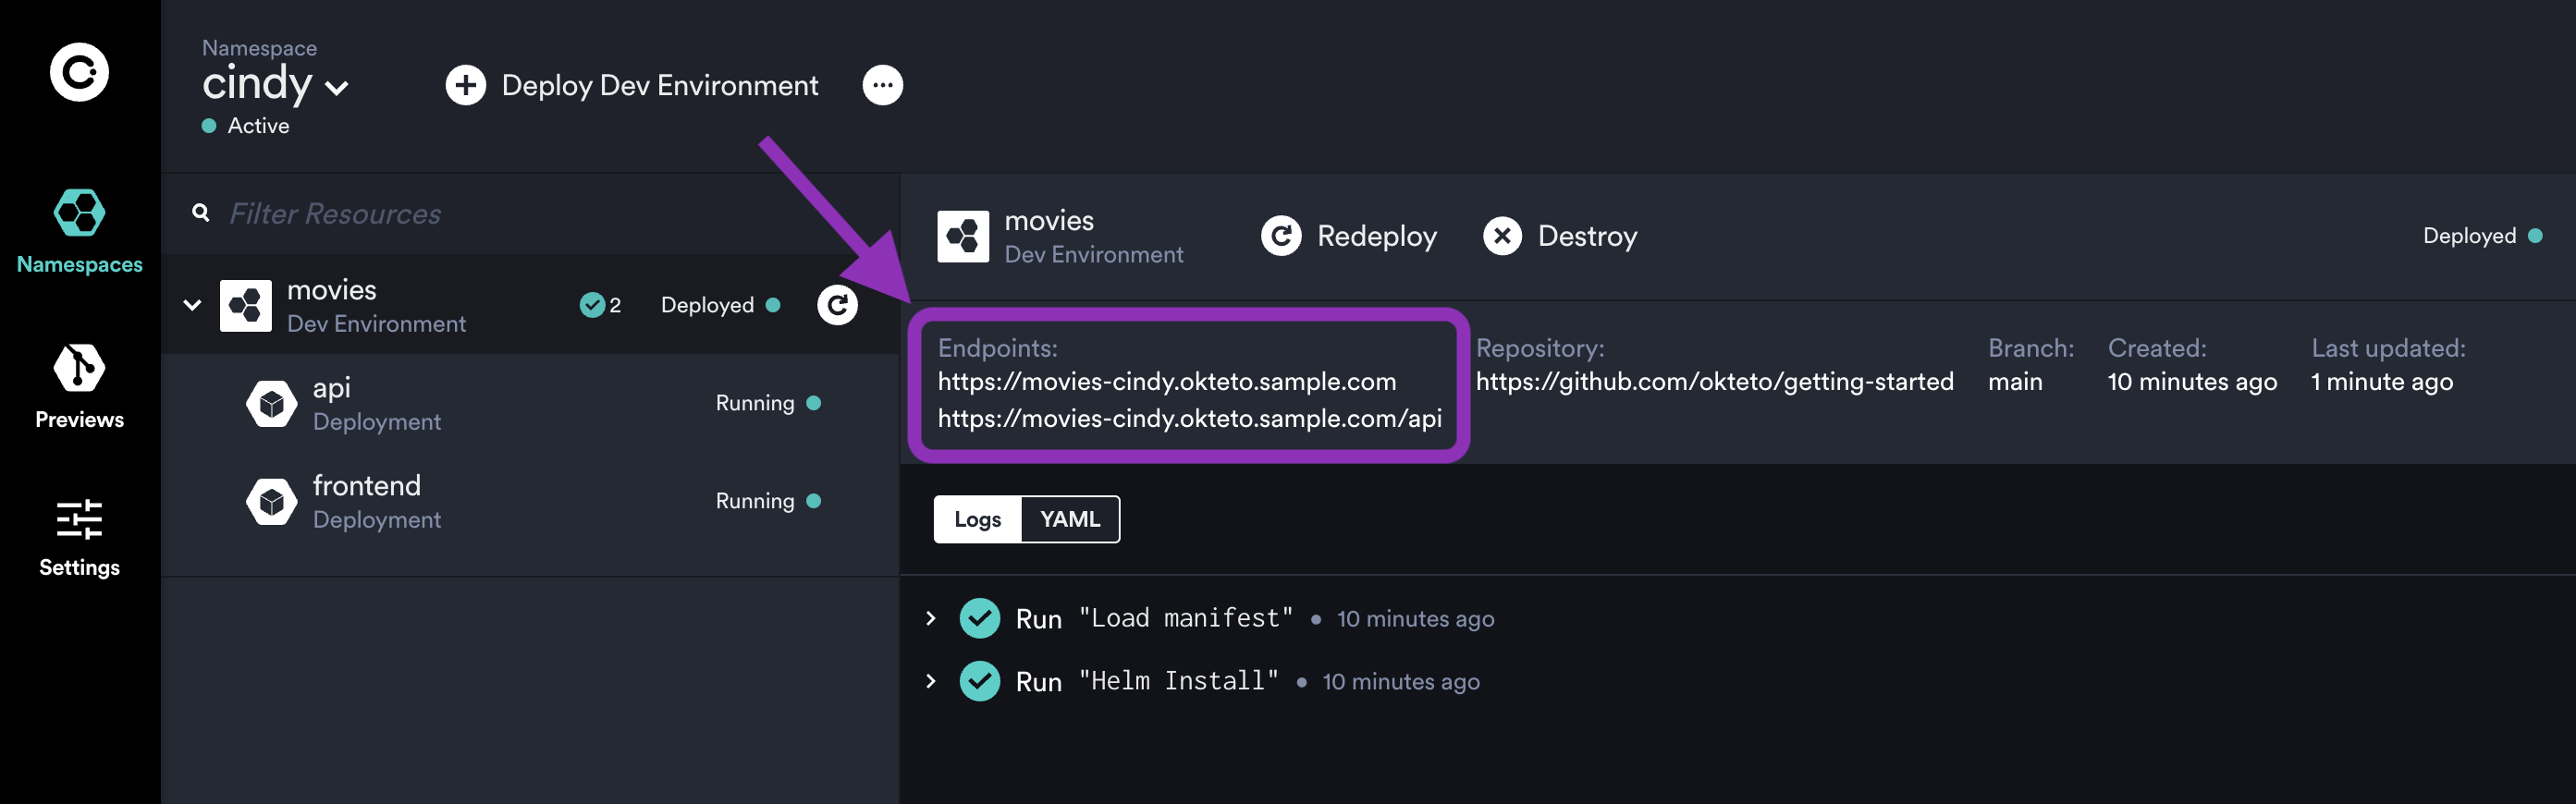 Movies Onboard Endpoints